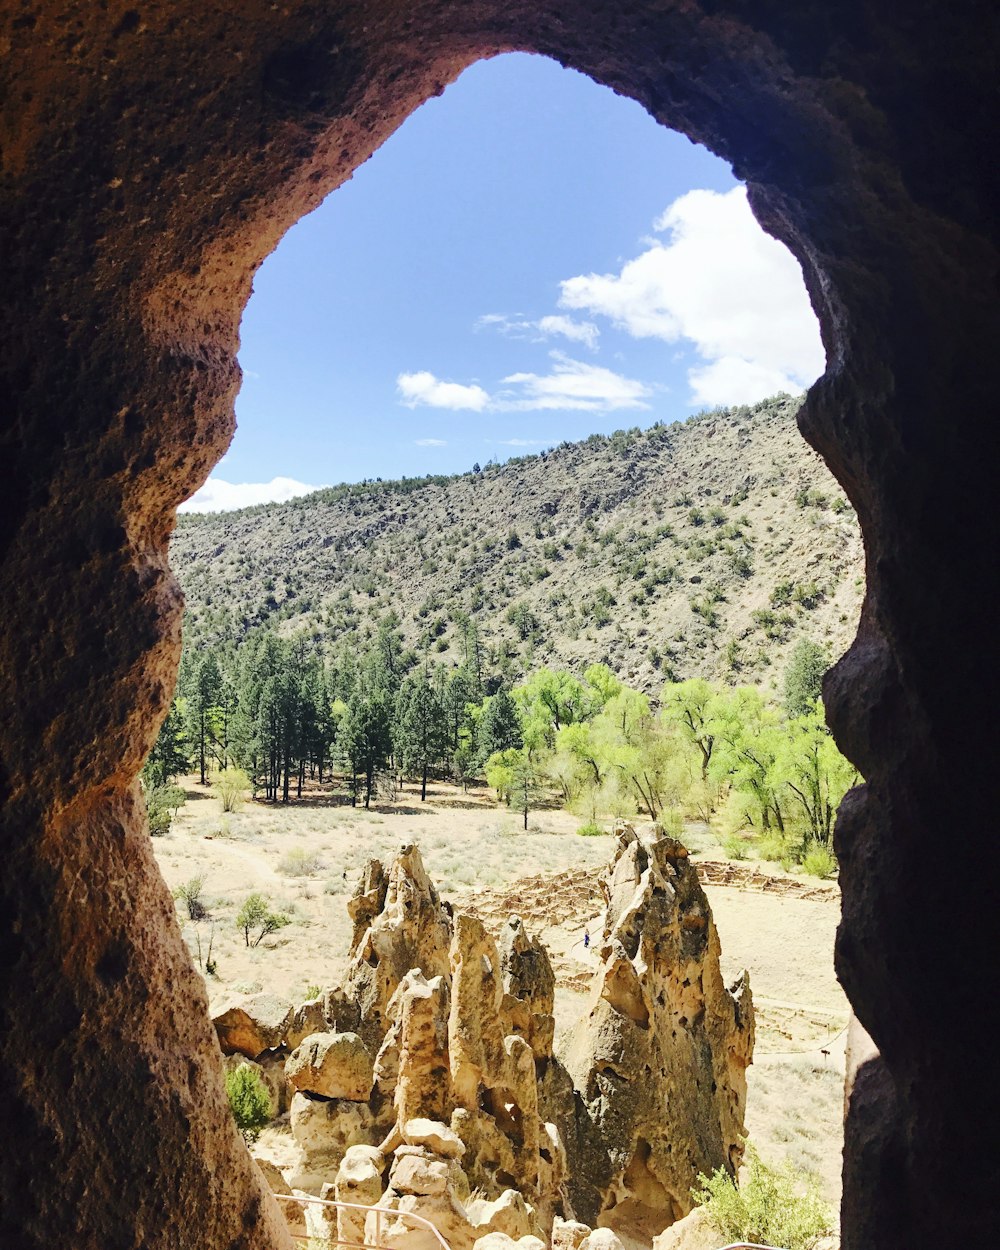 a view of a rocky landscape through a hole in a rock wall